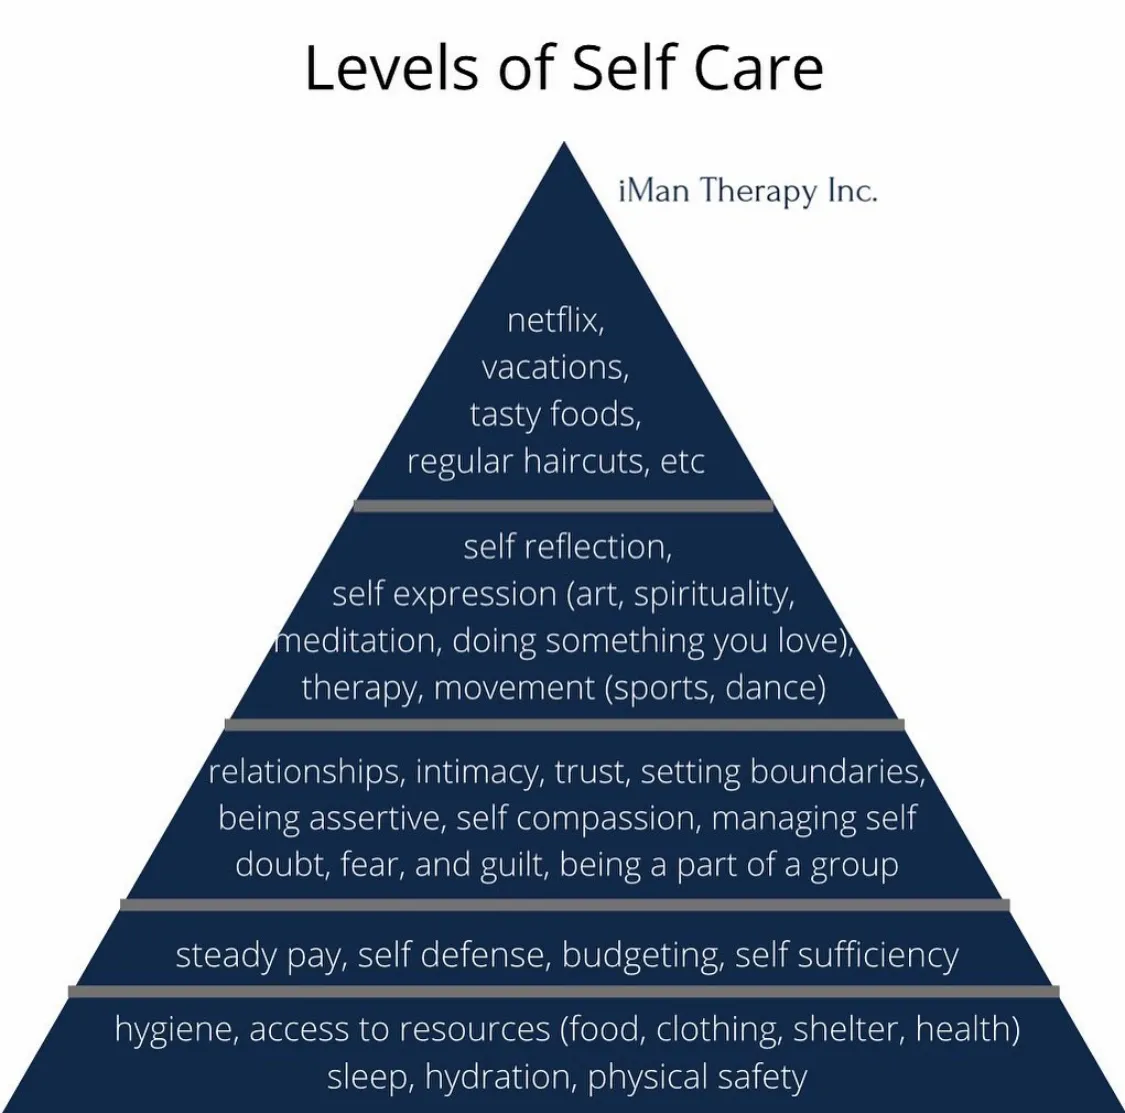 Levels of Self Care